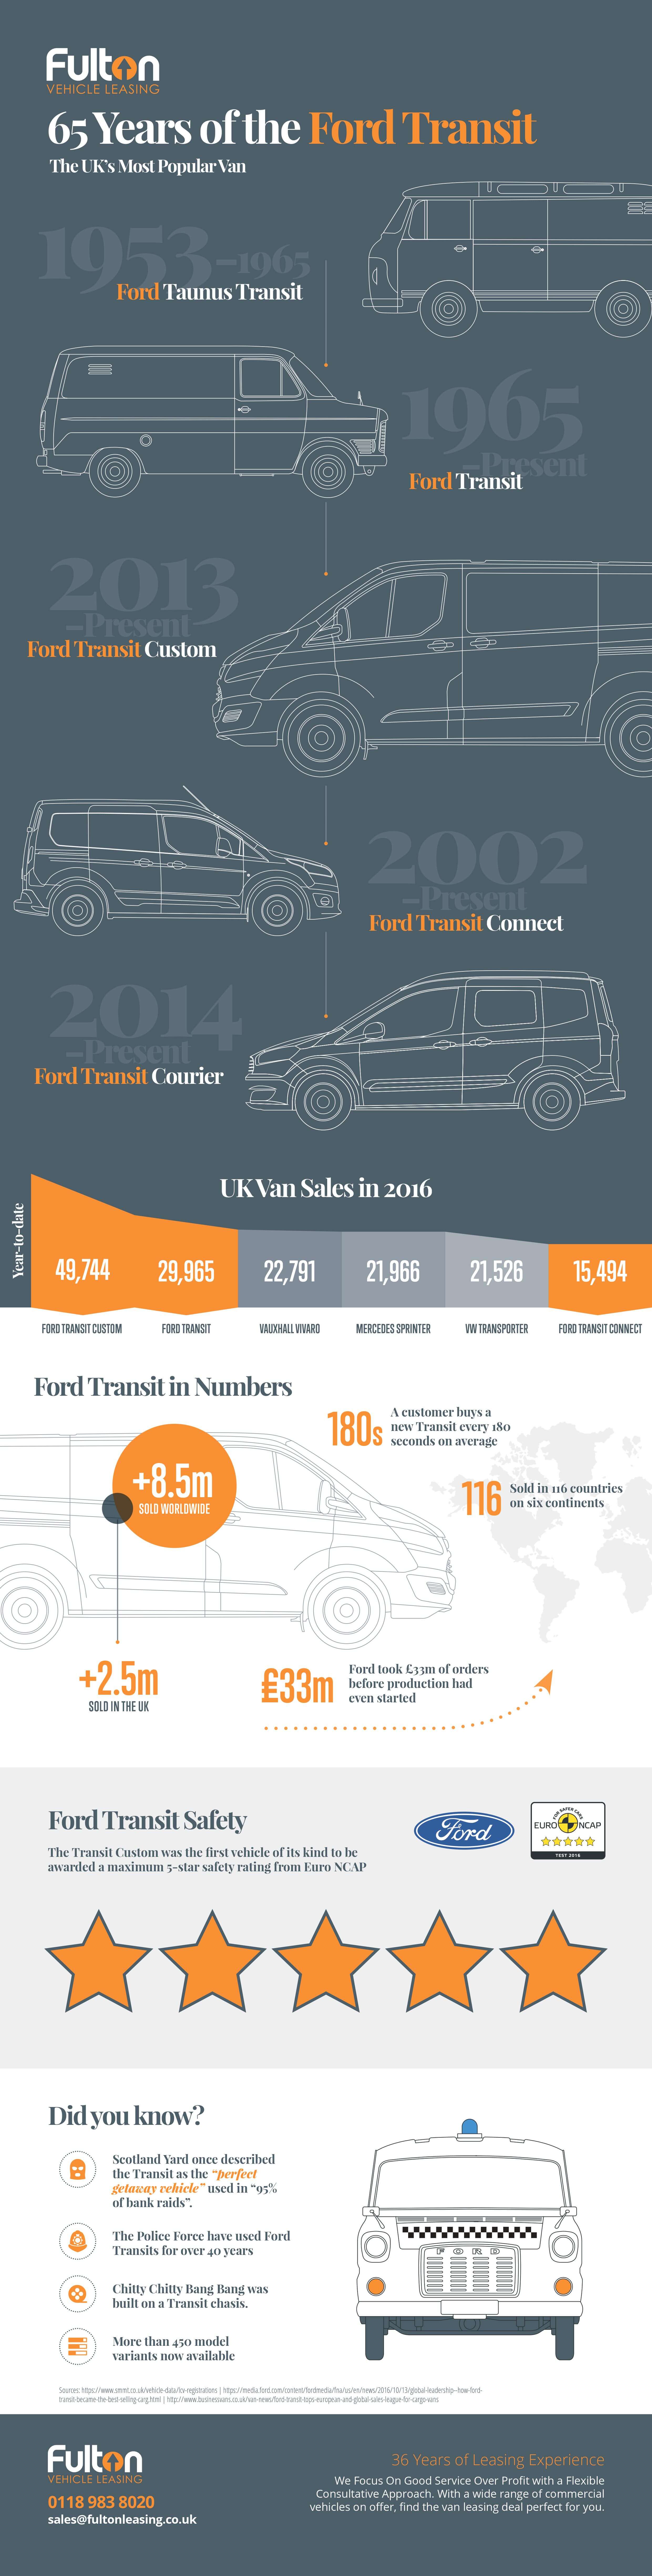 65 Years Young: Ford Transit’s Evolution - Infographic